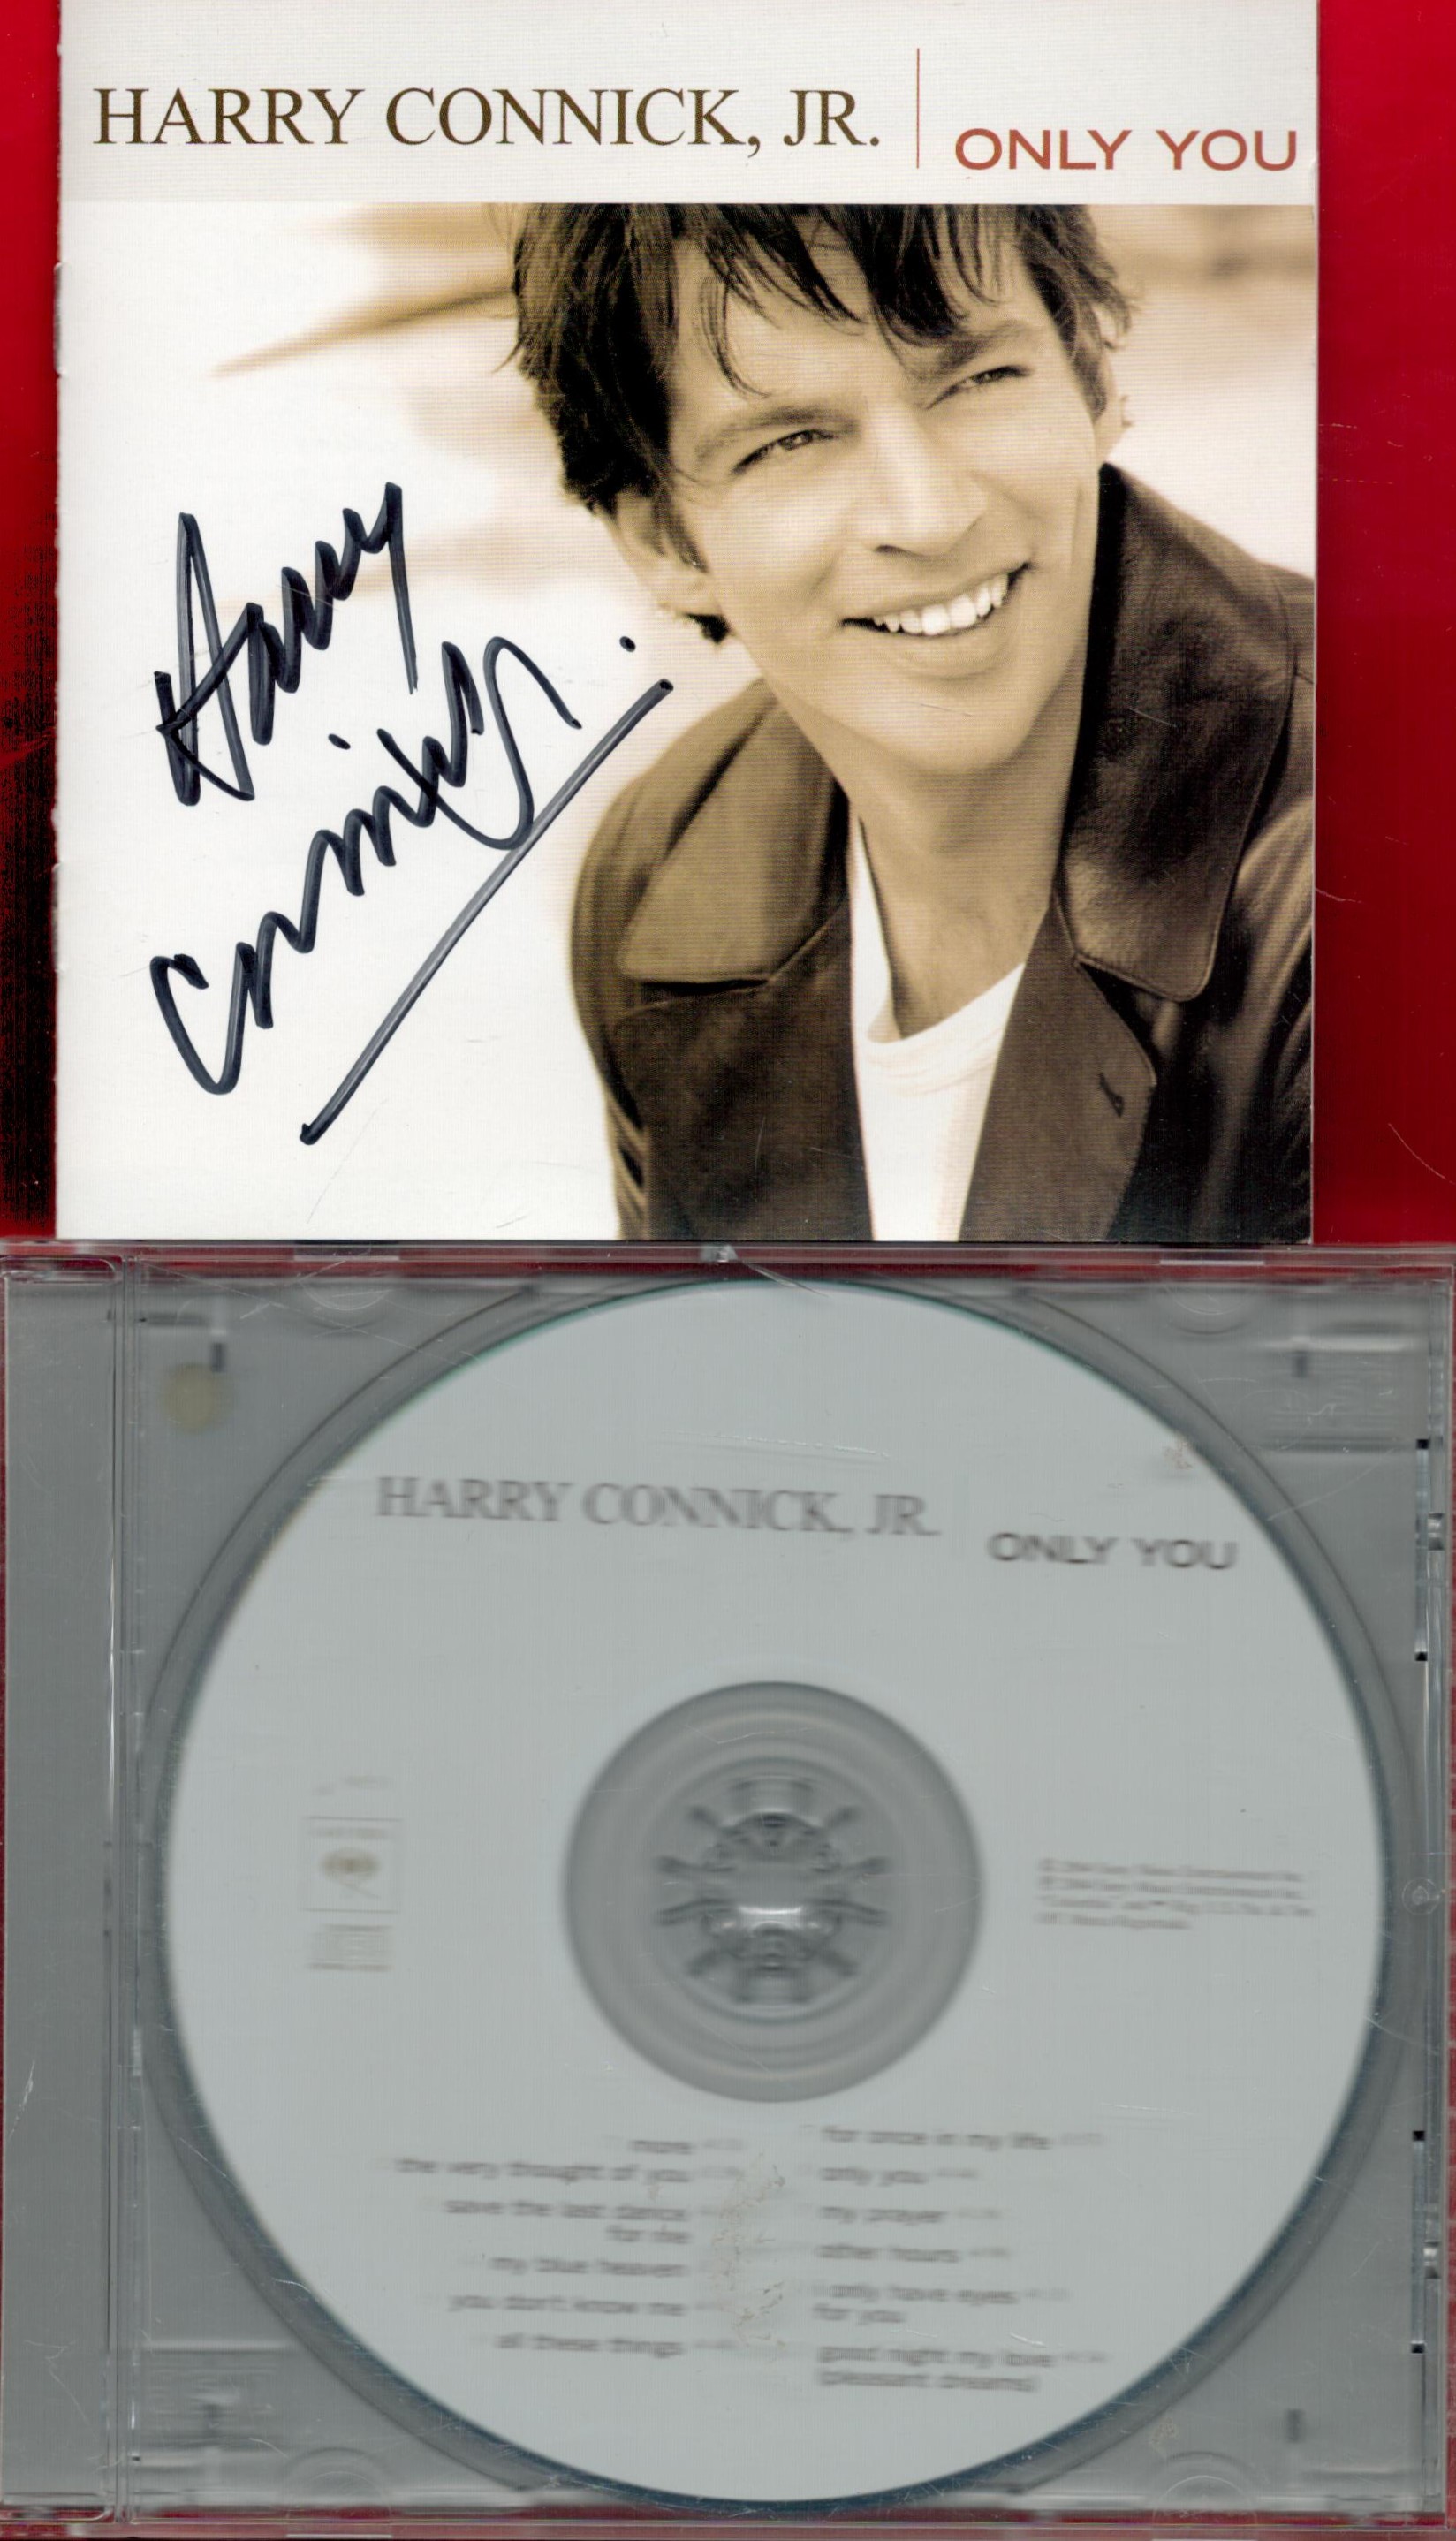 Harry Connick Jr Signed Only You CD sleeve With CD Included. Signed in black ink. . Good